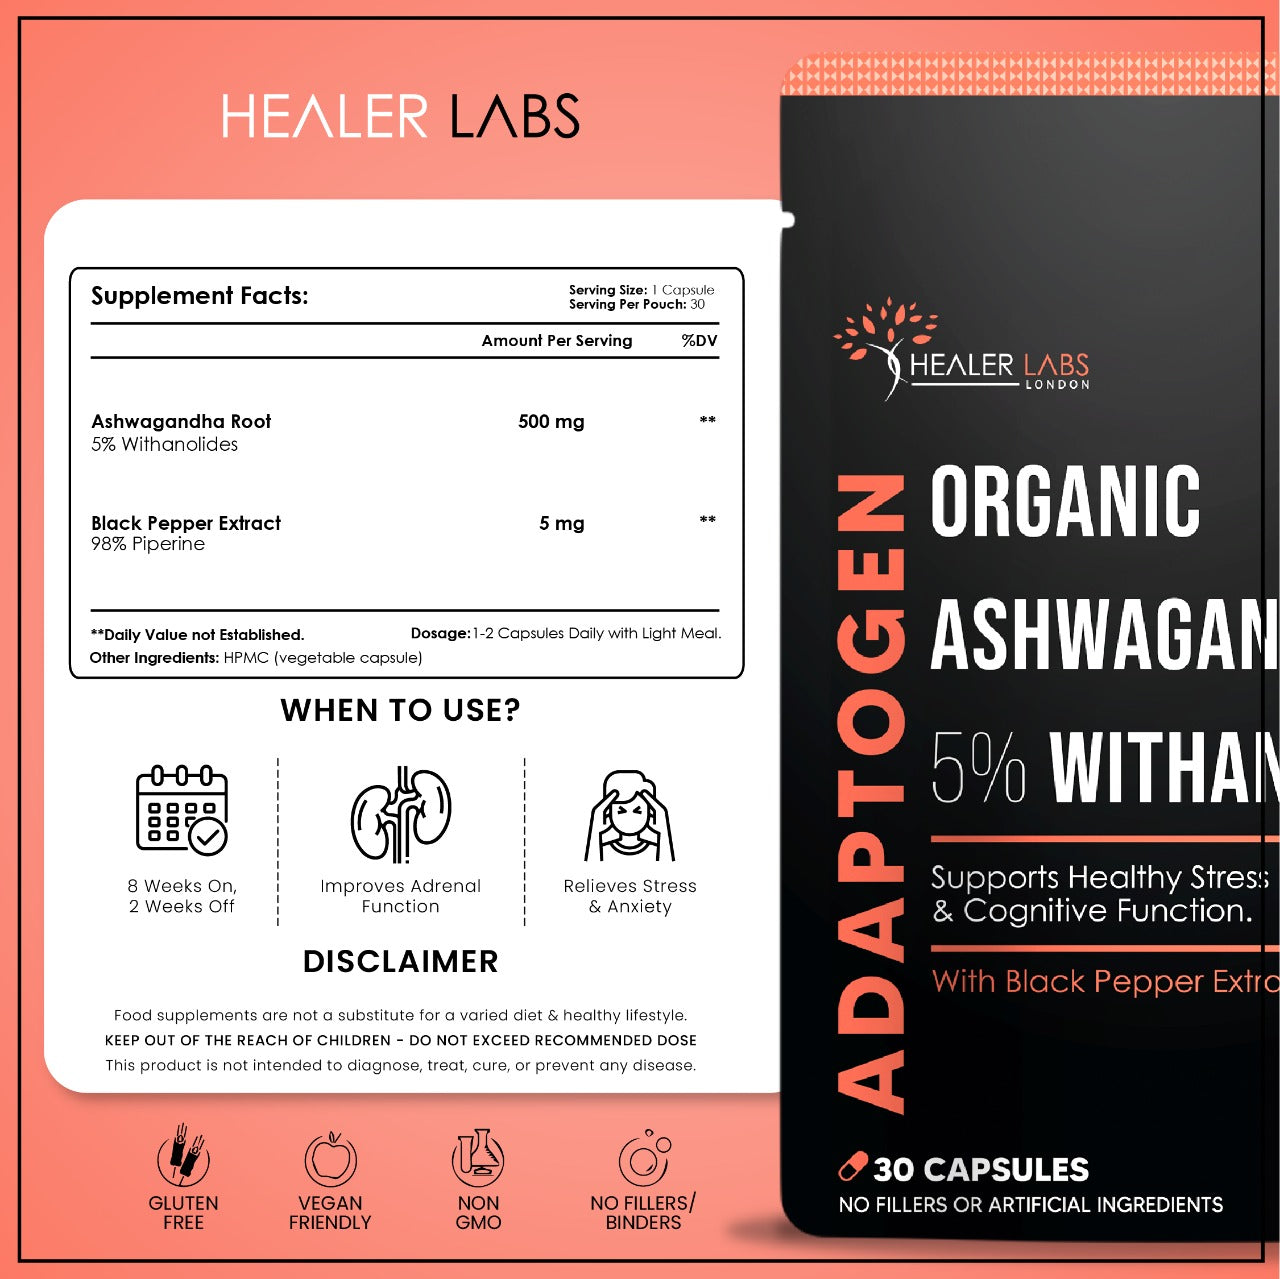  Healer Labs - Organic Ashwagandha 5% Withanolides - The Beauty Corp.